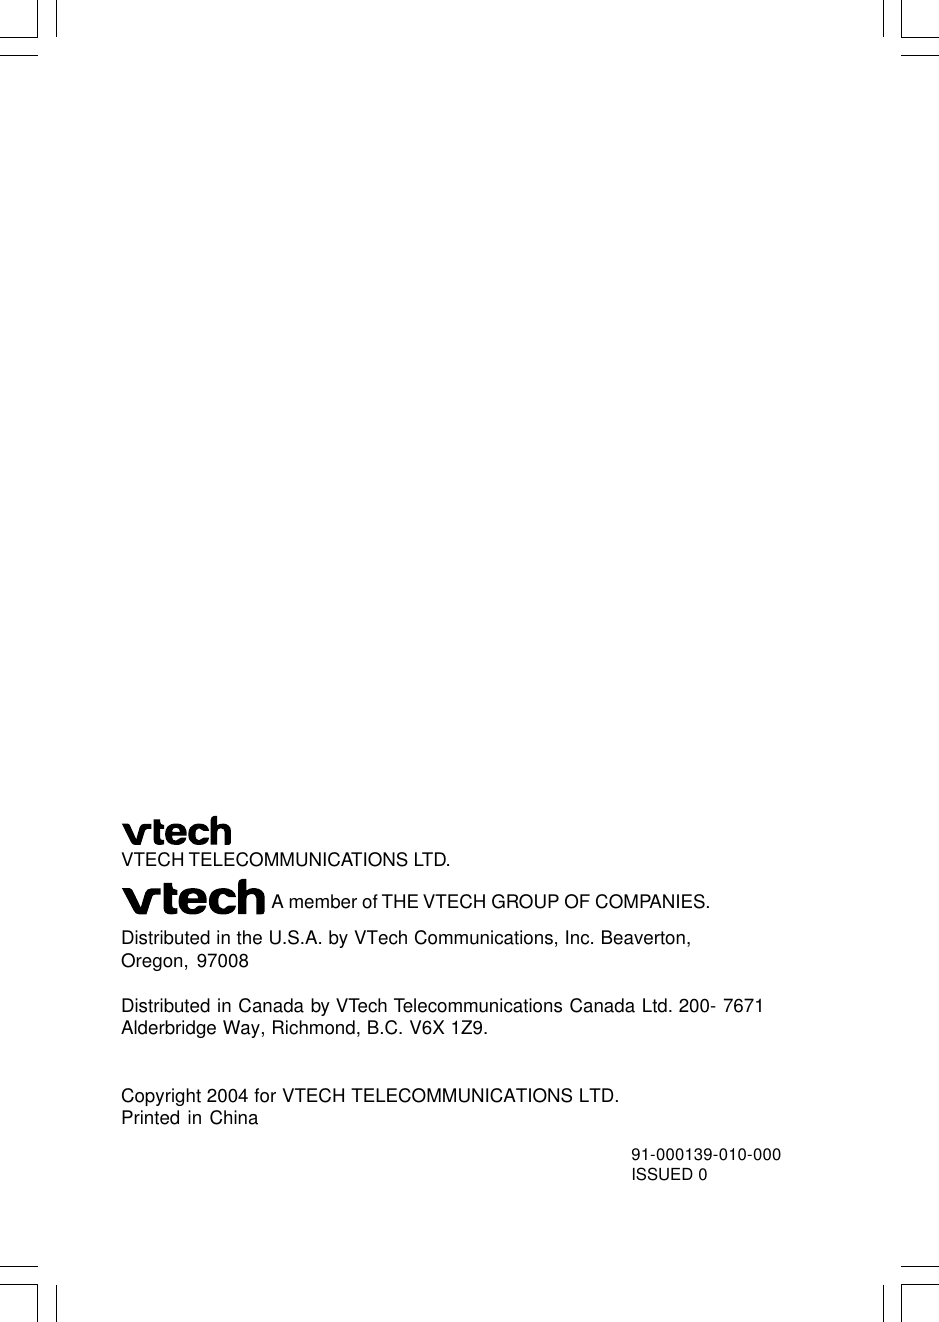 91-000139-010-000ISSUED 0VTECH TELECOMMUNICATIONS LTD.Distributed in the U.S.A. by VTech Communications, Inc. Beaverton,Oregon, 97008Distributed in Canada by VTech Telecommunications Canada Ltd. 200- 7671Alderbridge Way, Richmond, B.C. V6X 1Z9.Copyright 2004 for VTECH TELECOMMUNICATIONS LTD.Printed in ChinaA member of THE VTECH GROUP OF COMPANIES.